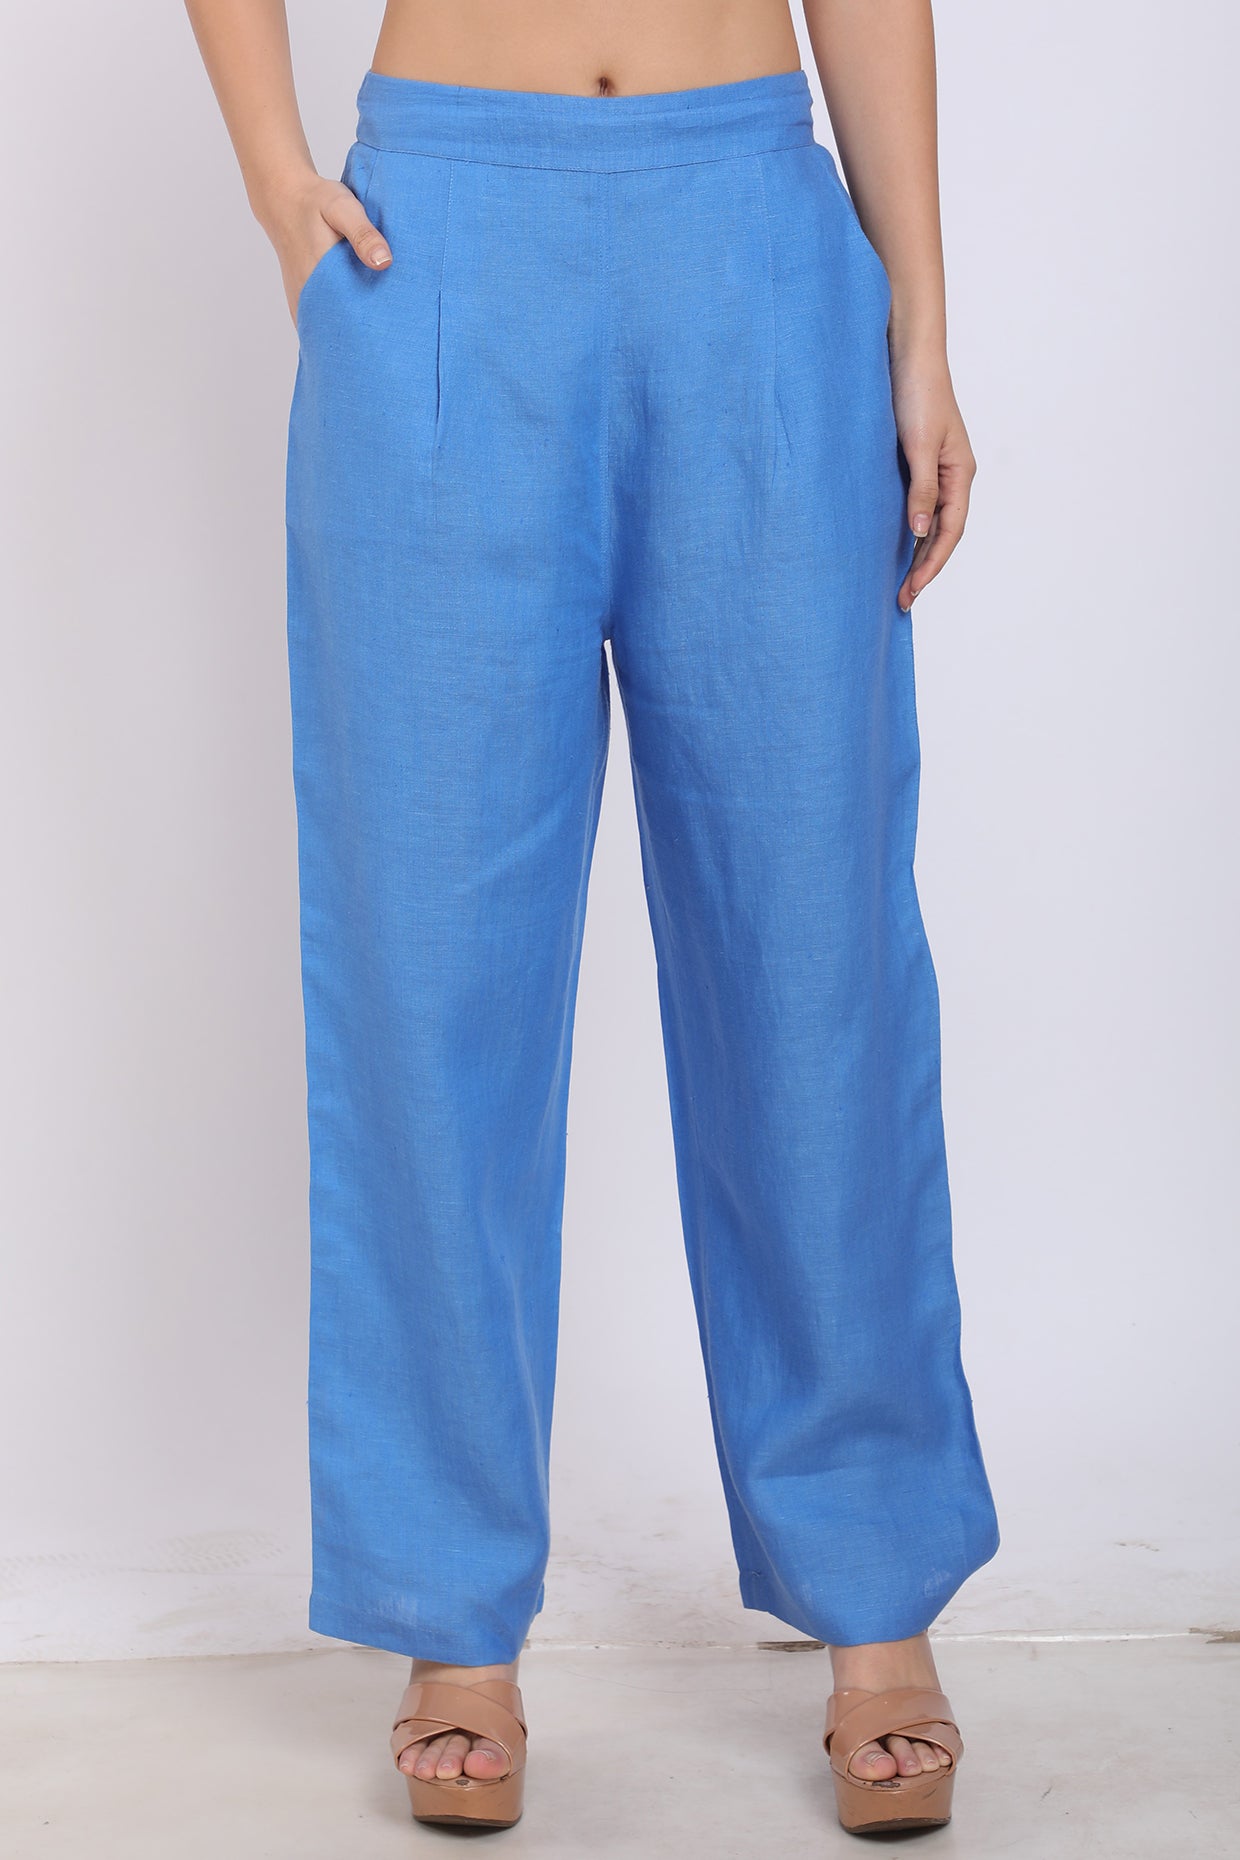 Zip Fly Royal Blue Chino Trousers | Men's Country Clothing | Cordings US